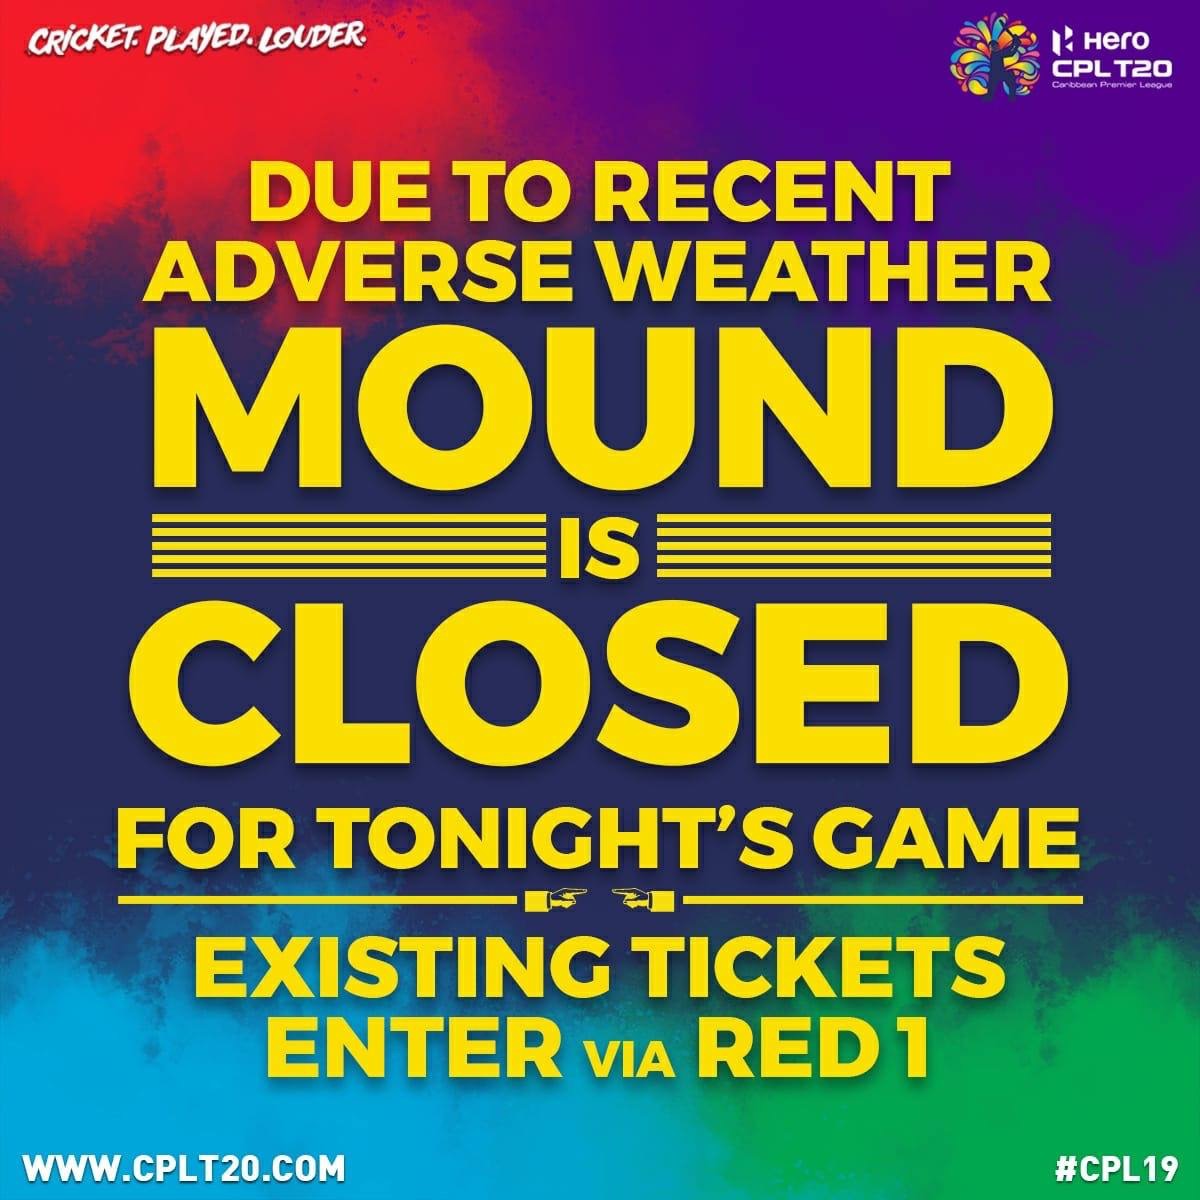 Grass area at the mound will be closed for tonight’s CPL match